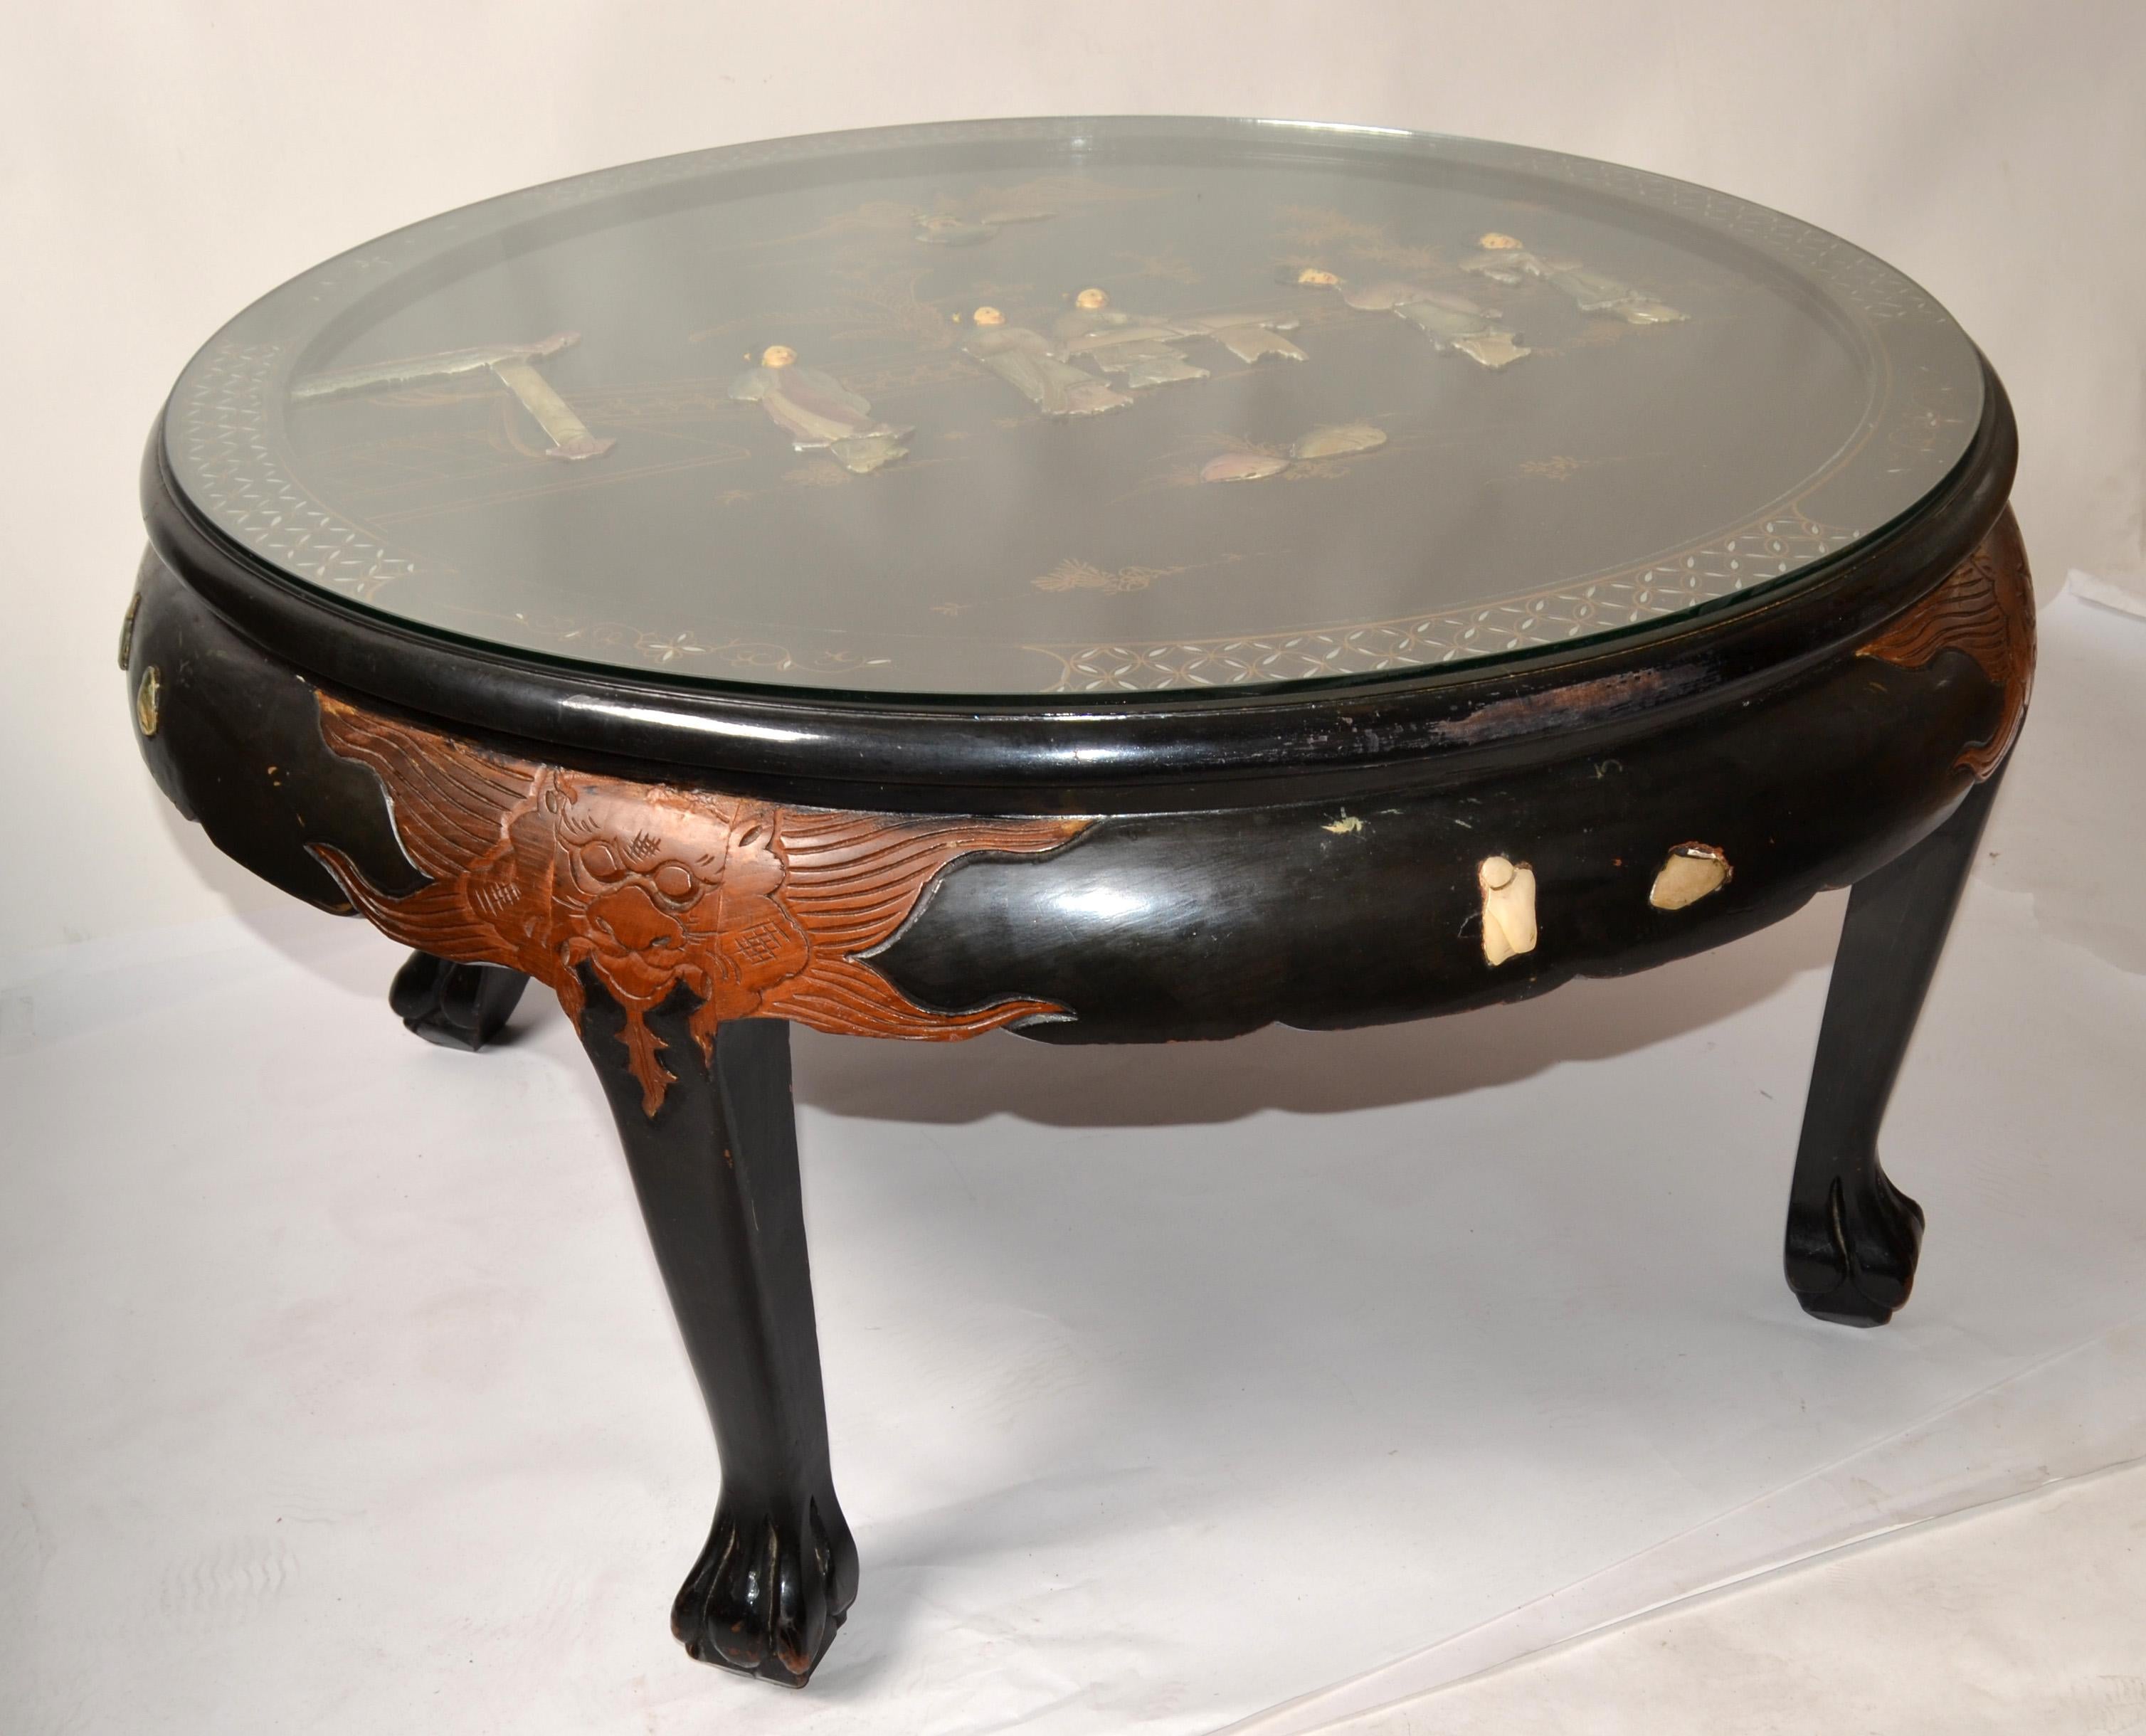 Chinoiserie Round Chinese Jade Stonework Bone Black Lacquered Carved Coffee Table Glass Top